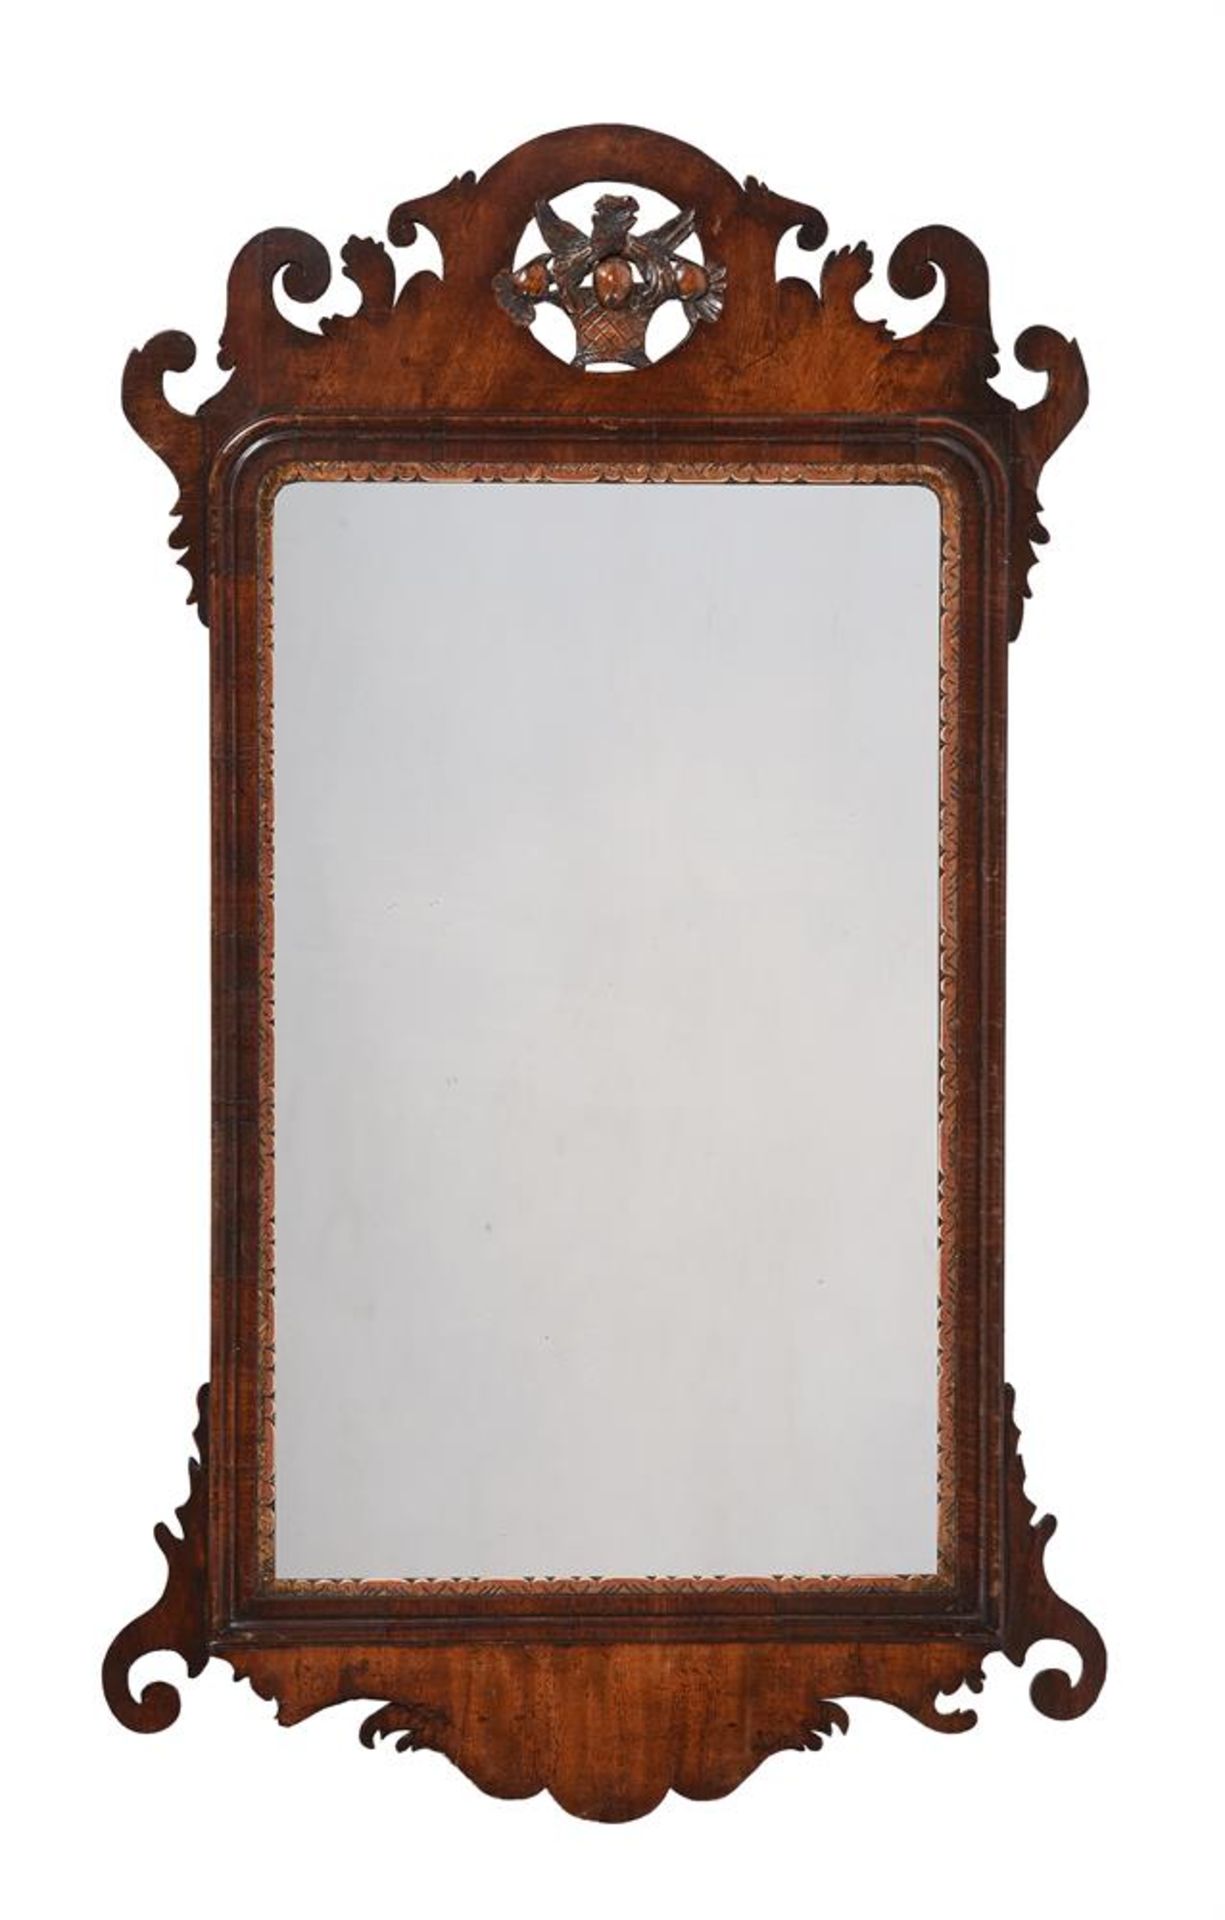 TWO MAHOGANY AND PARCEL GILT FRET WALL MIRRORS - Image 2 of 2